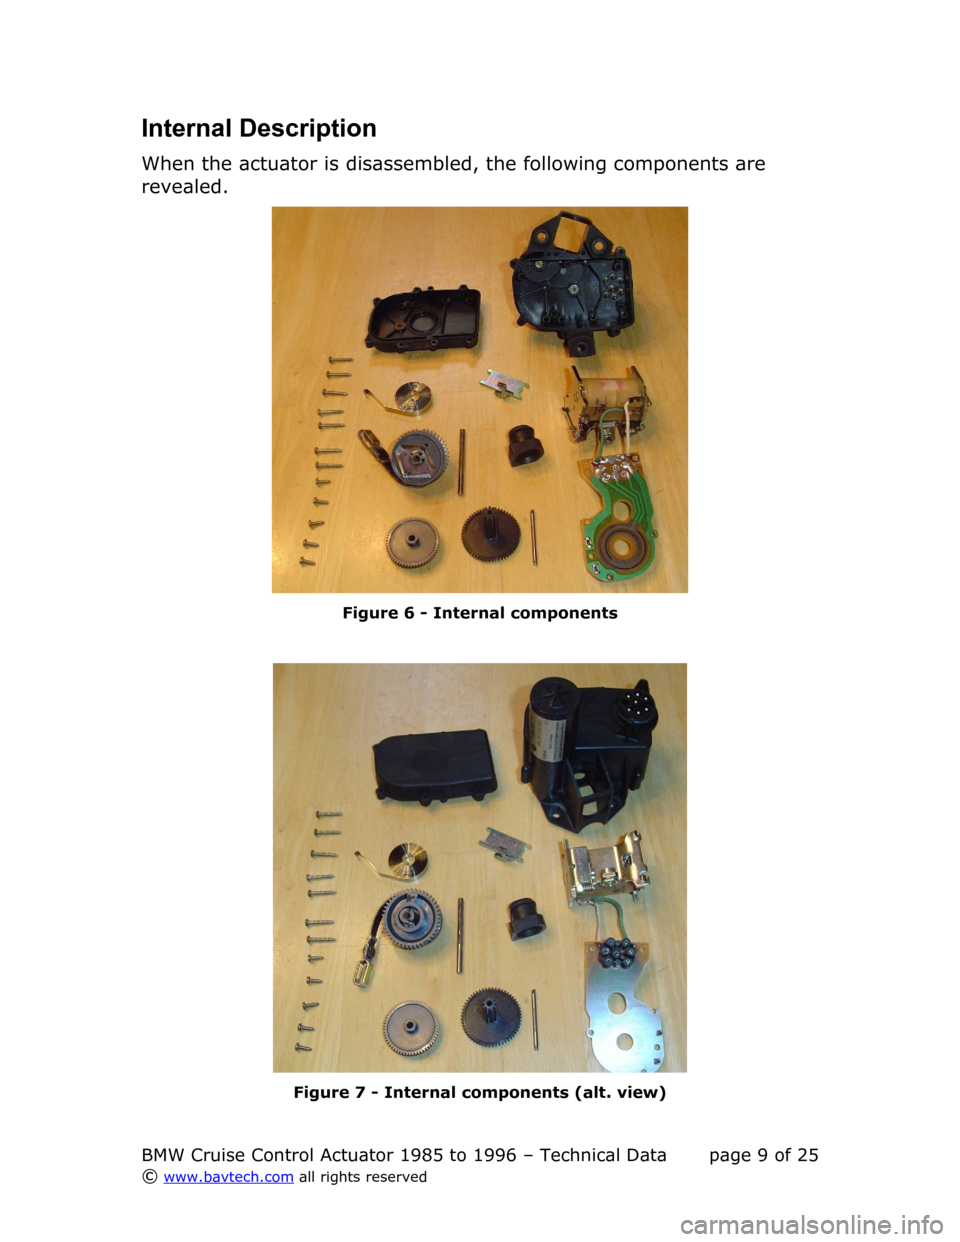 BMW 5 SERIES 1991 E34 Cruise Control Acutator Internal Description
When the actuator is disassembled, the following components are  
revealed.
Figure  6  - Internal components
Figure  7  - Internal components (alt. view)
BMW Cruise Control Actuat